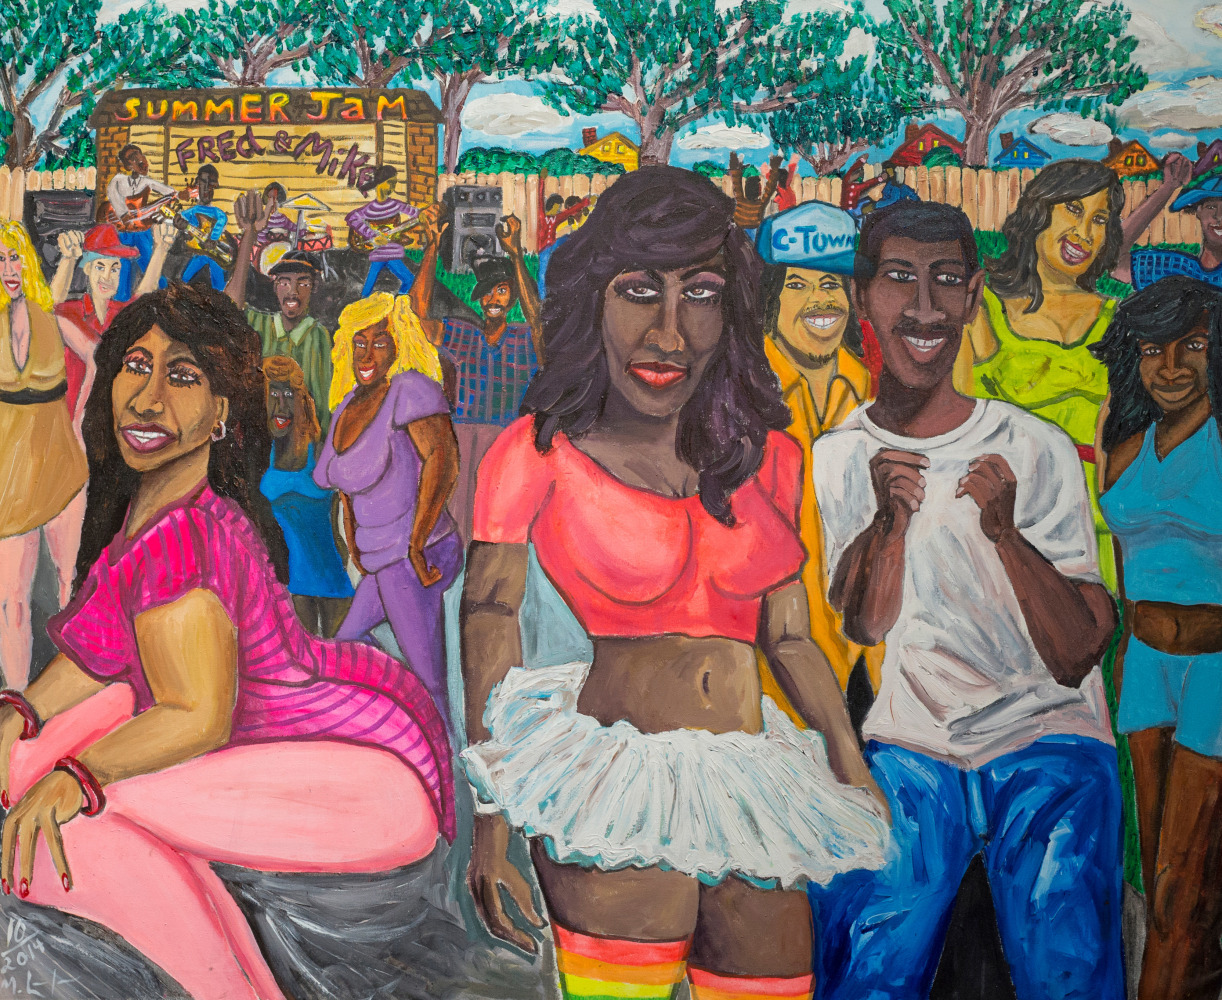 Welcome to the Party, 2014
Acrylic on Canvas
39 x 48 inches